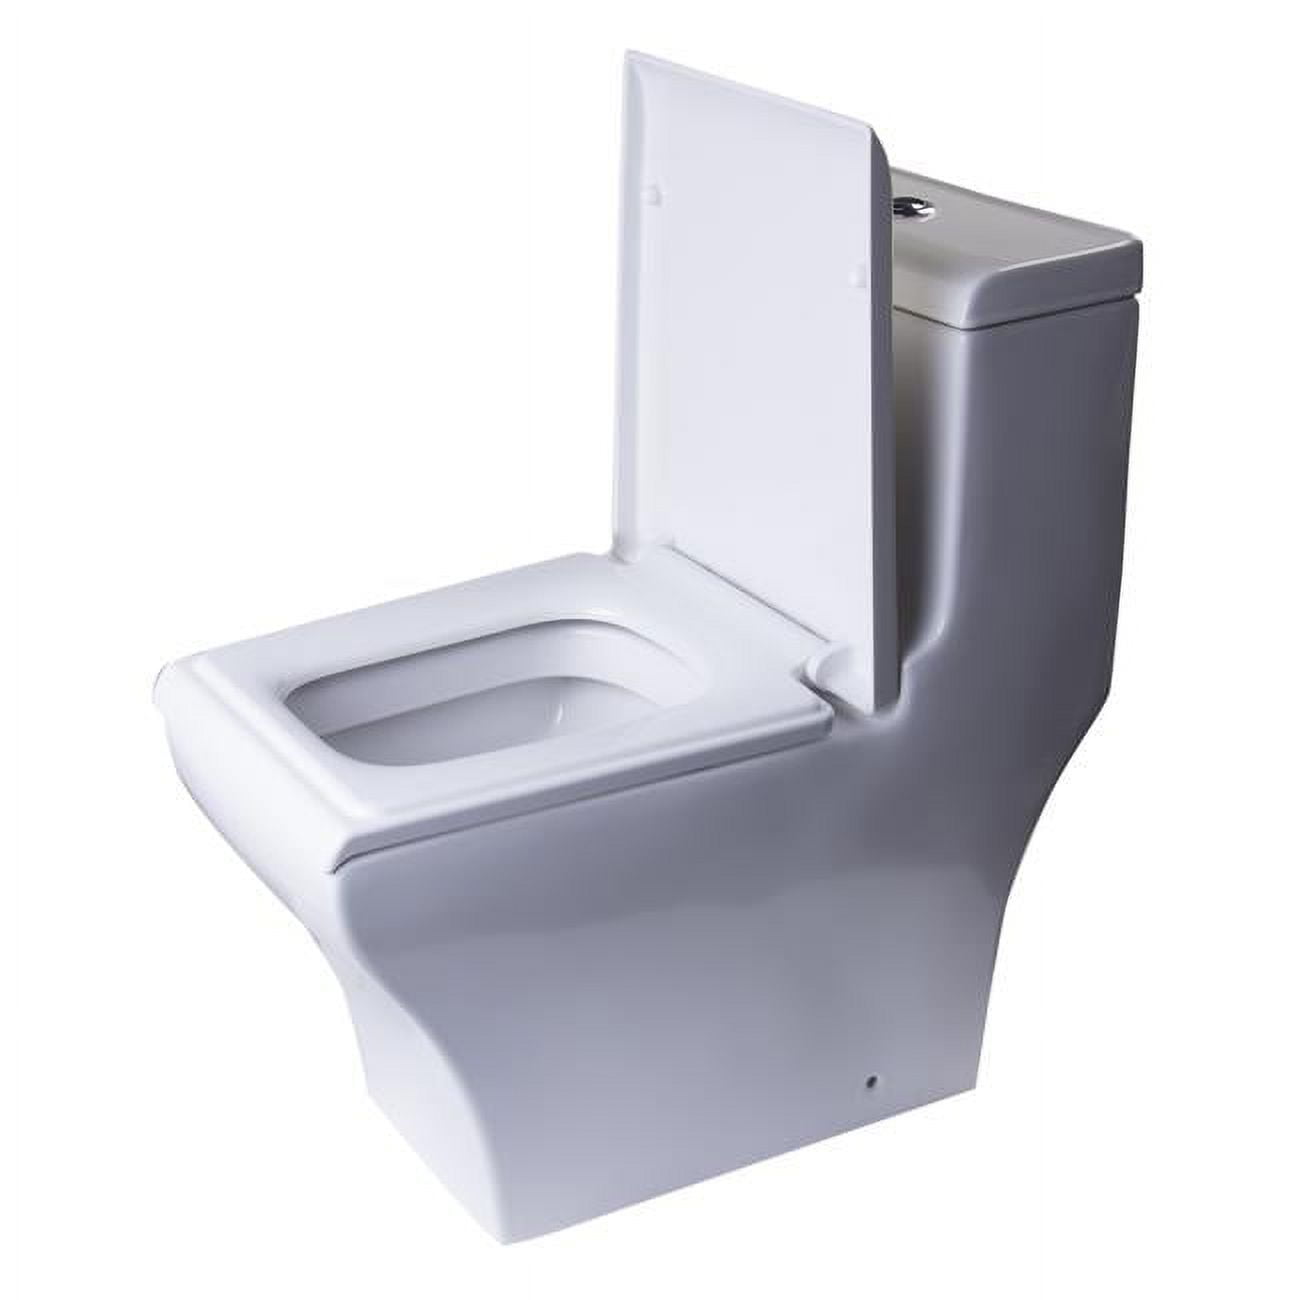 R-356seat Replacement Soft Closing Plastic Toilet Seat, White For Tb356